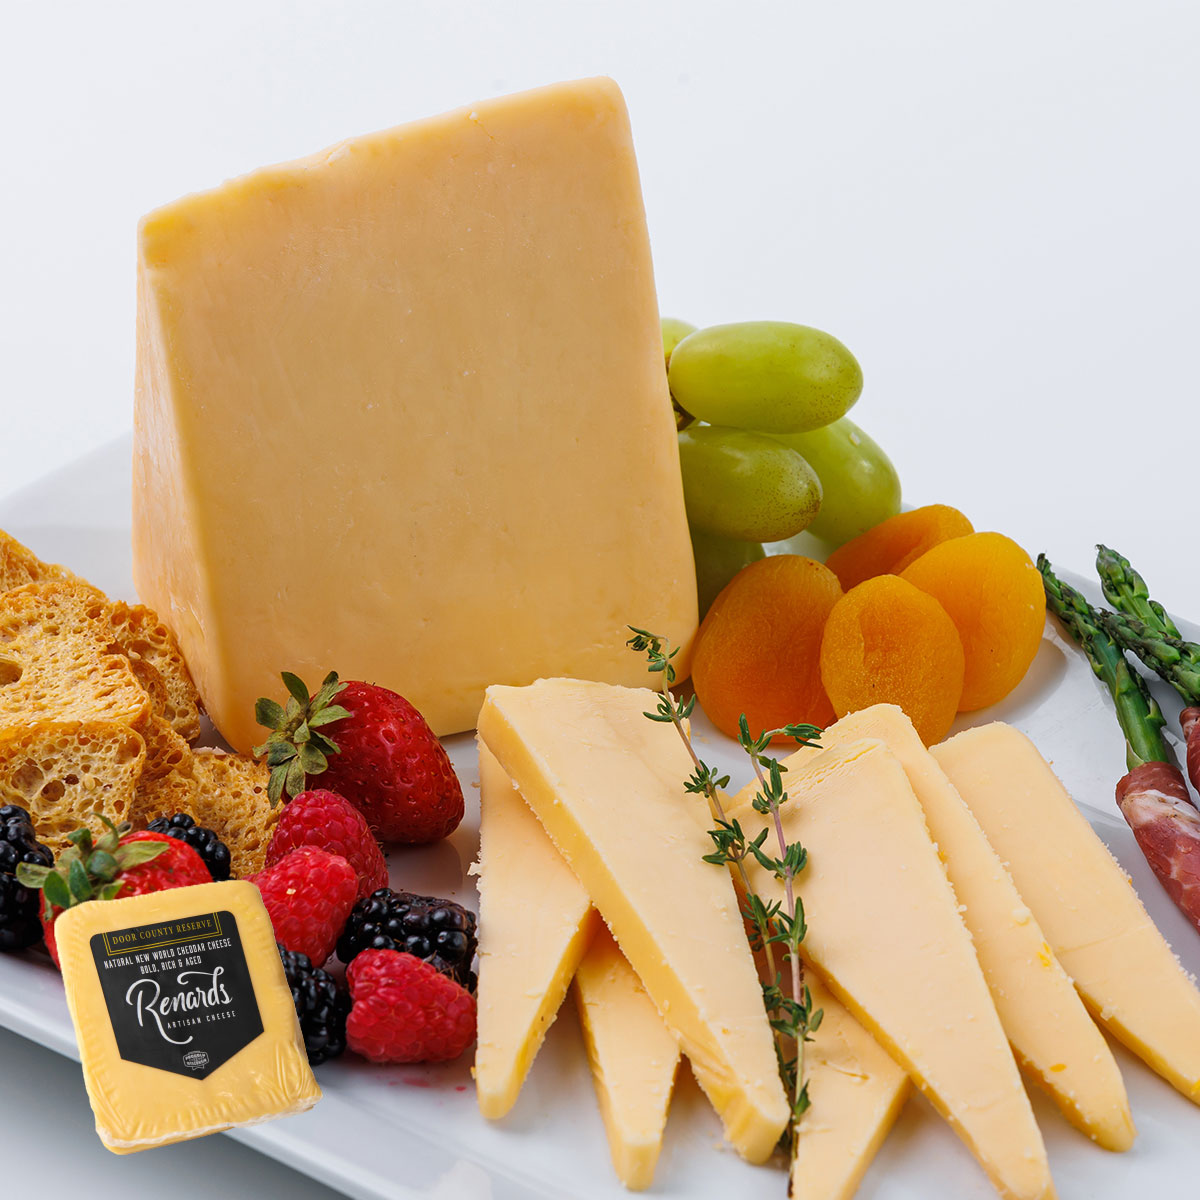 Image of Renard's New World Cheddar Wisconsin Cheese and Charcuterie board.